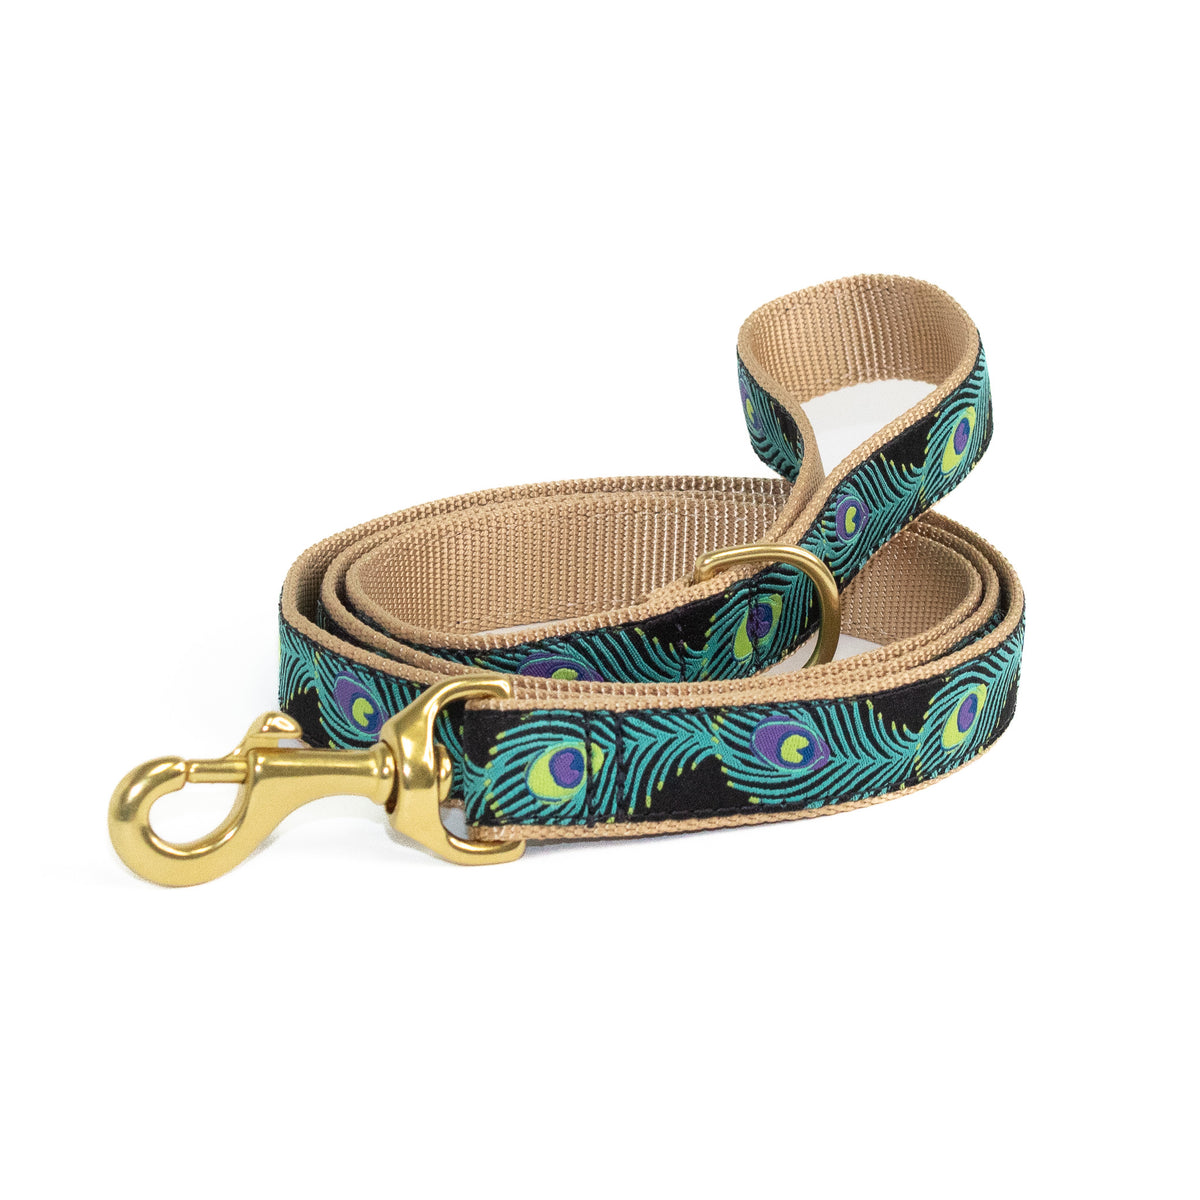 Up Country - Up Country Plaid Martingale Dog Collar – Up Country Inc